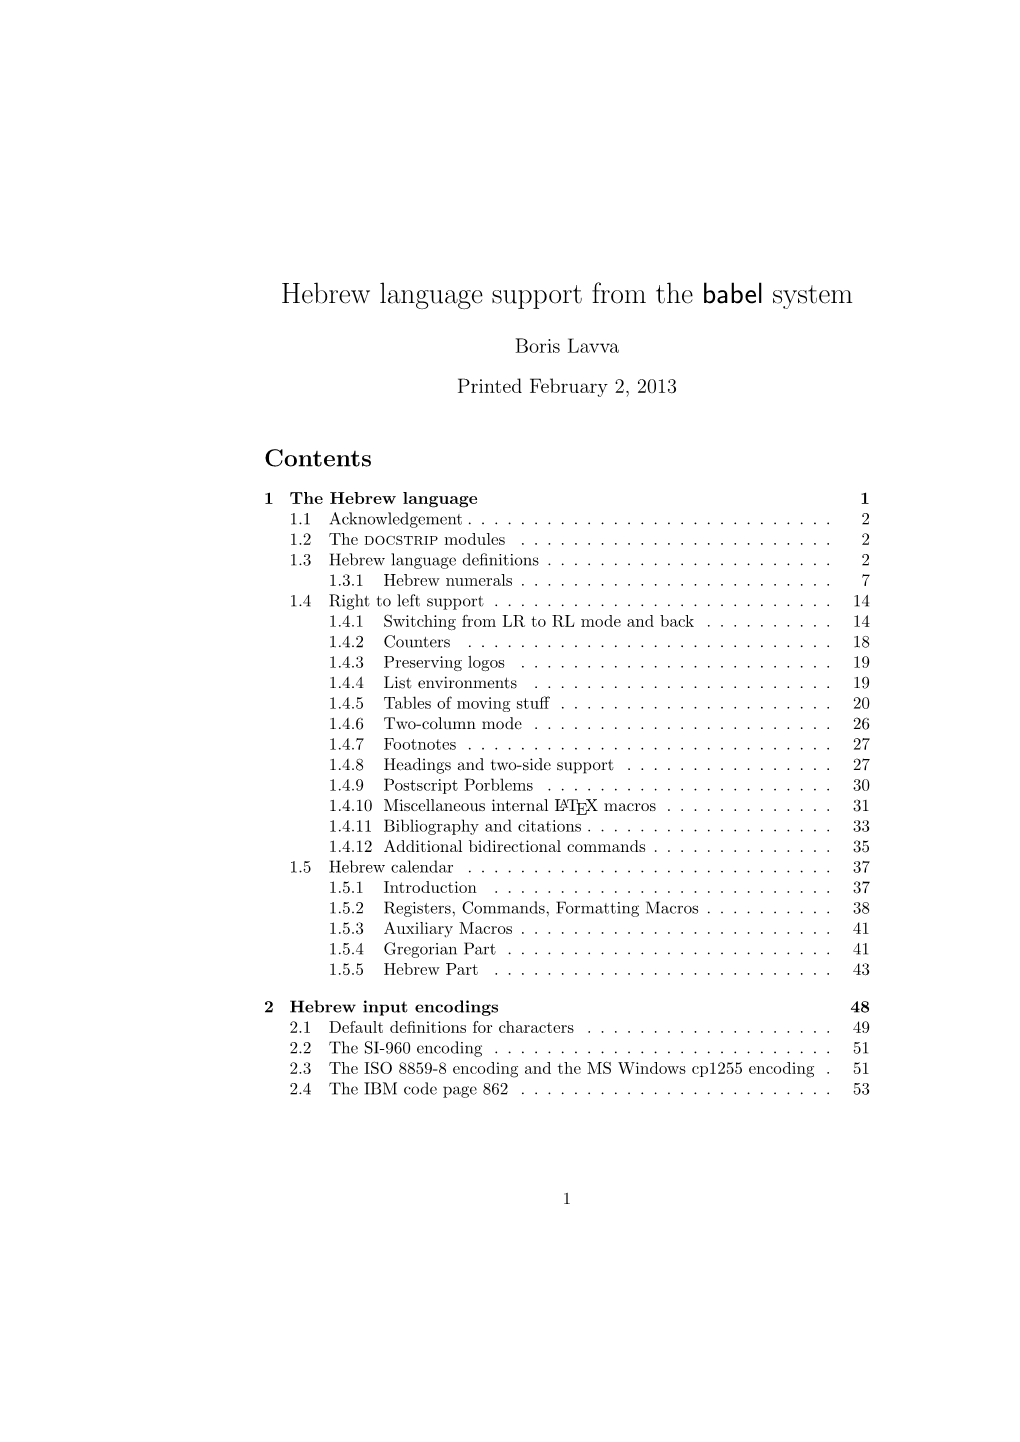 Hebrew Language Support from the Babel System